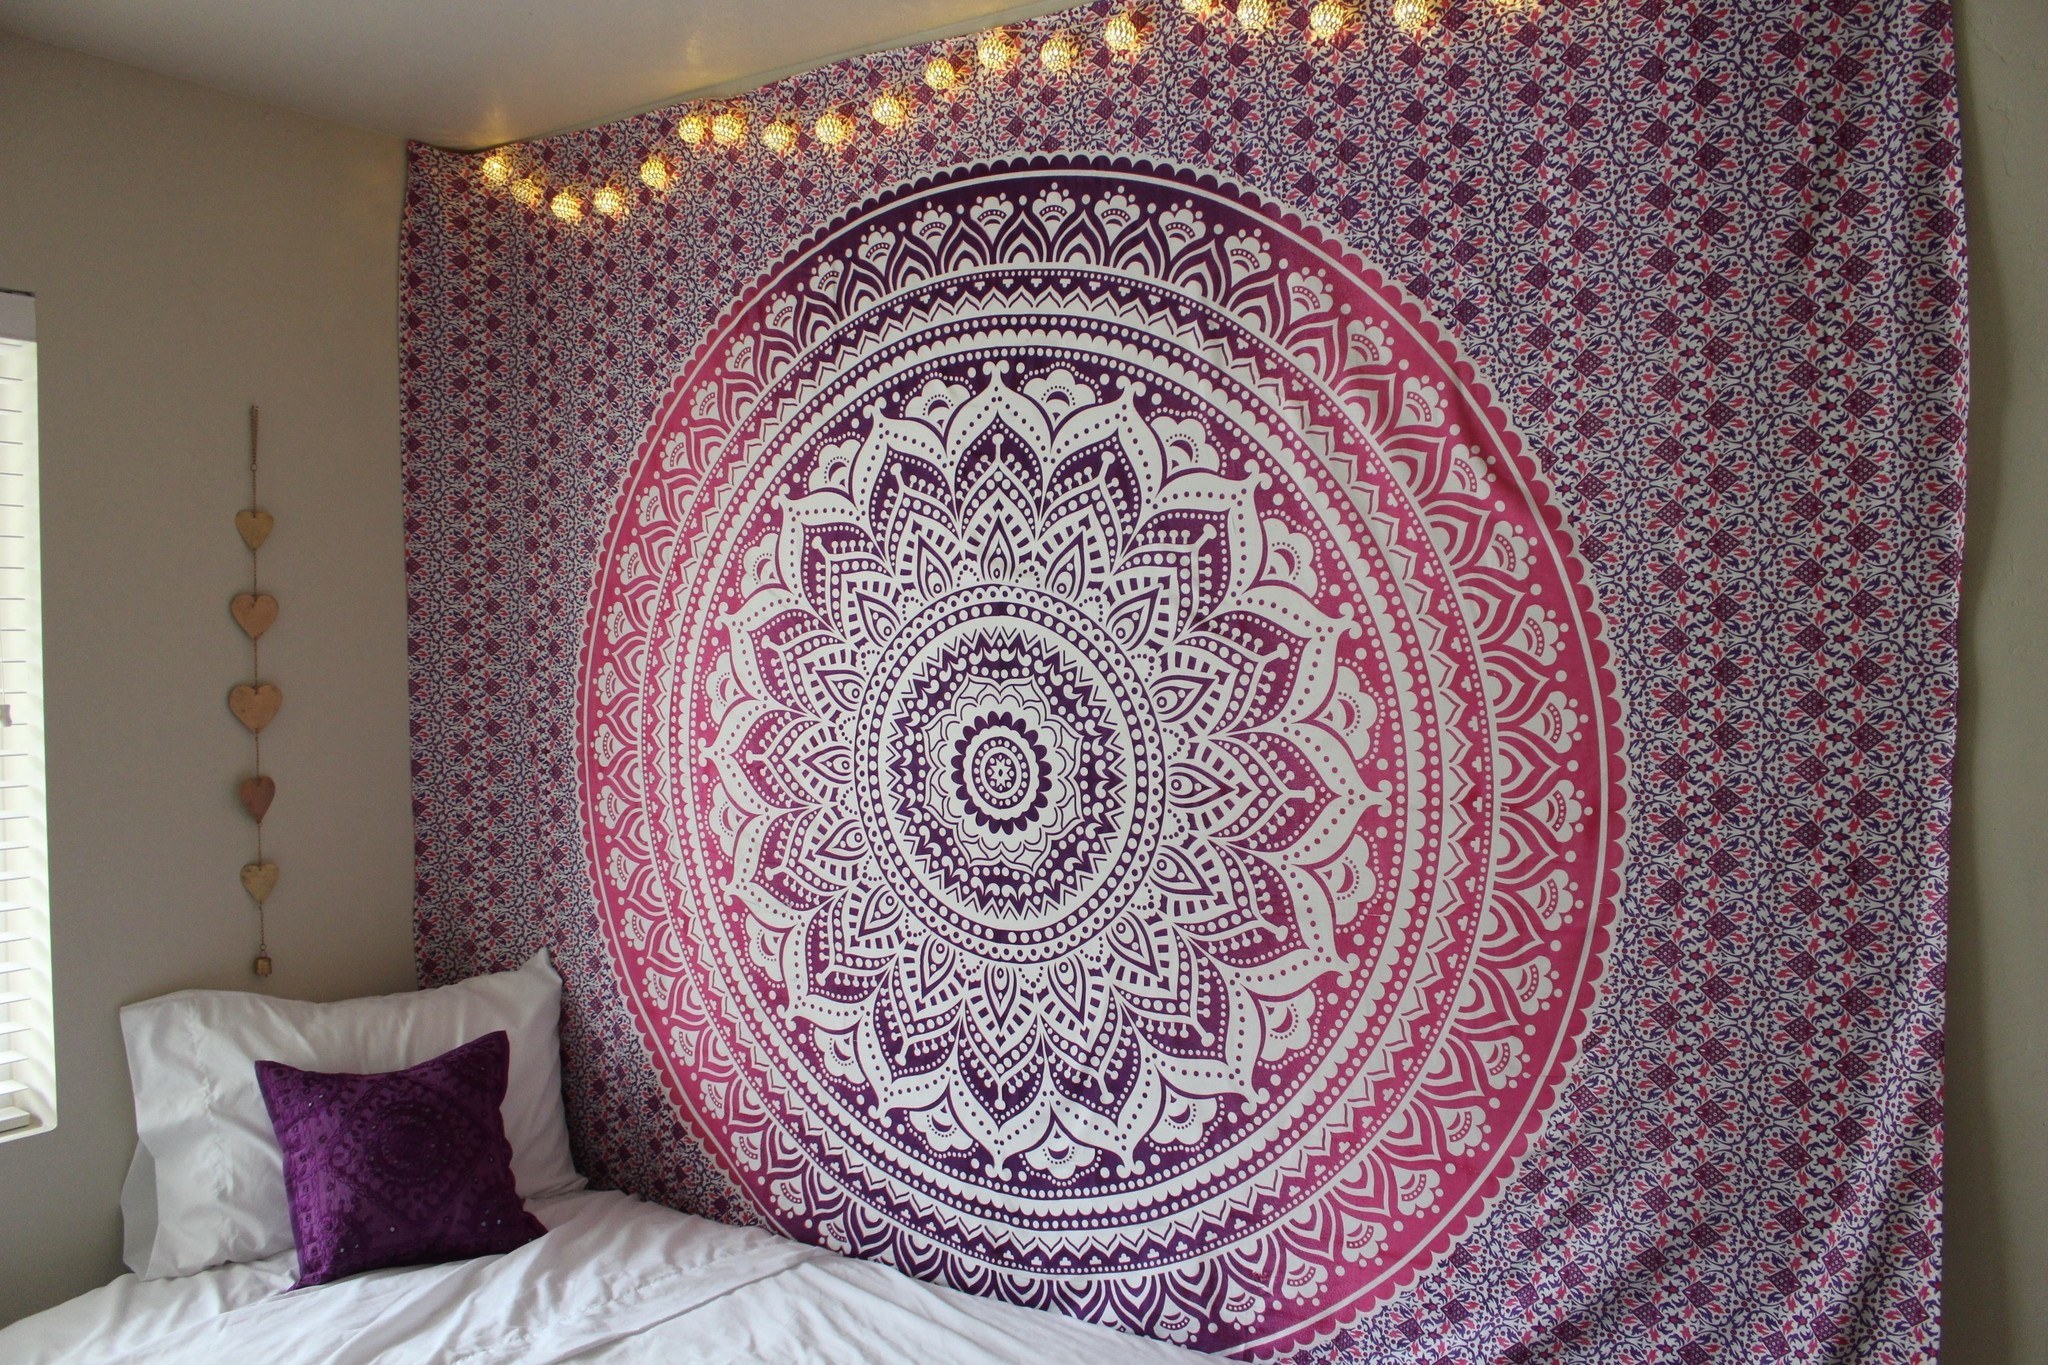 Twin Ombre Mandala Tapestry Hippie Indian Wall Hanging Bedspread Bedding Throw